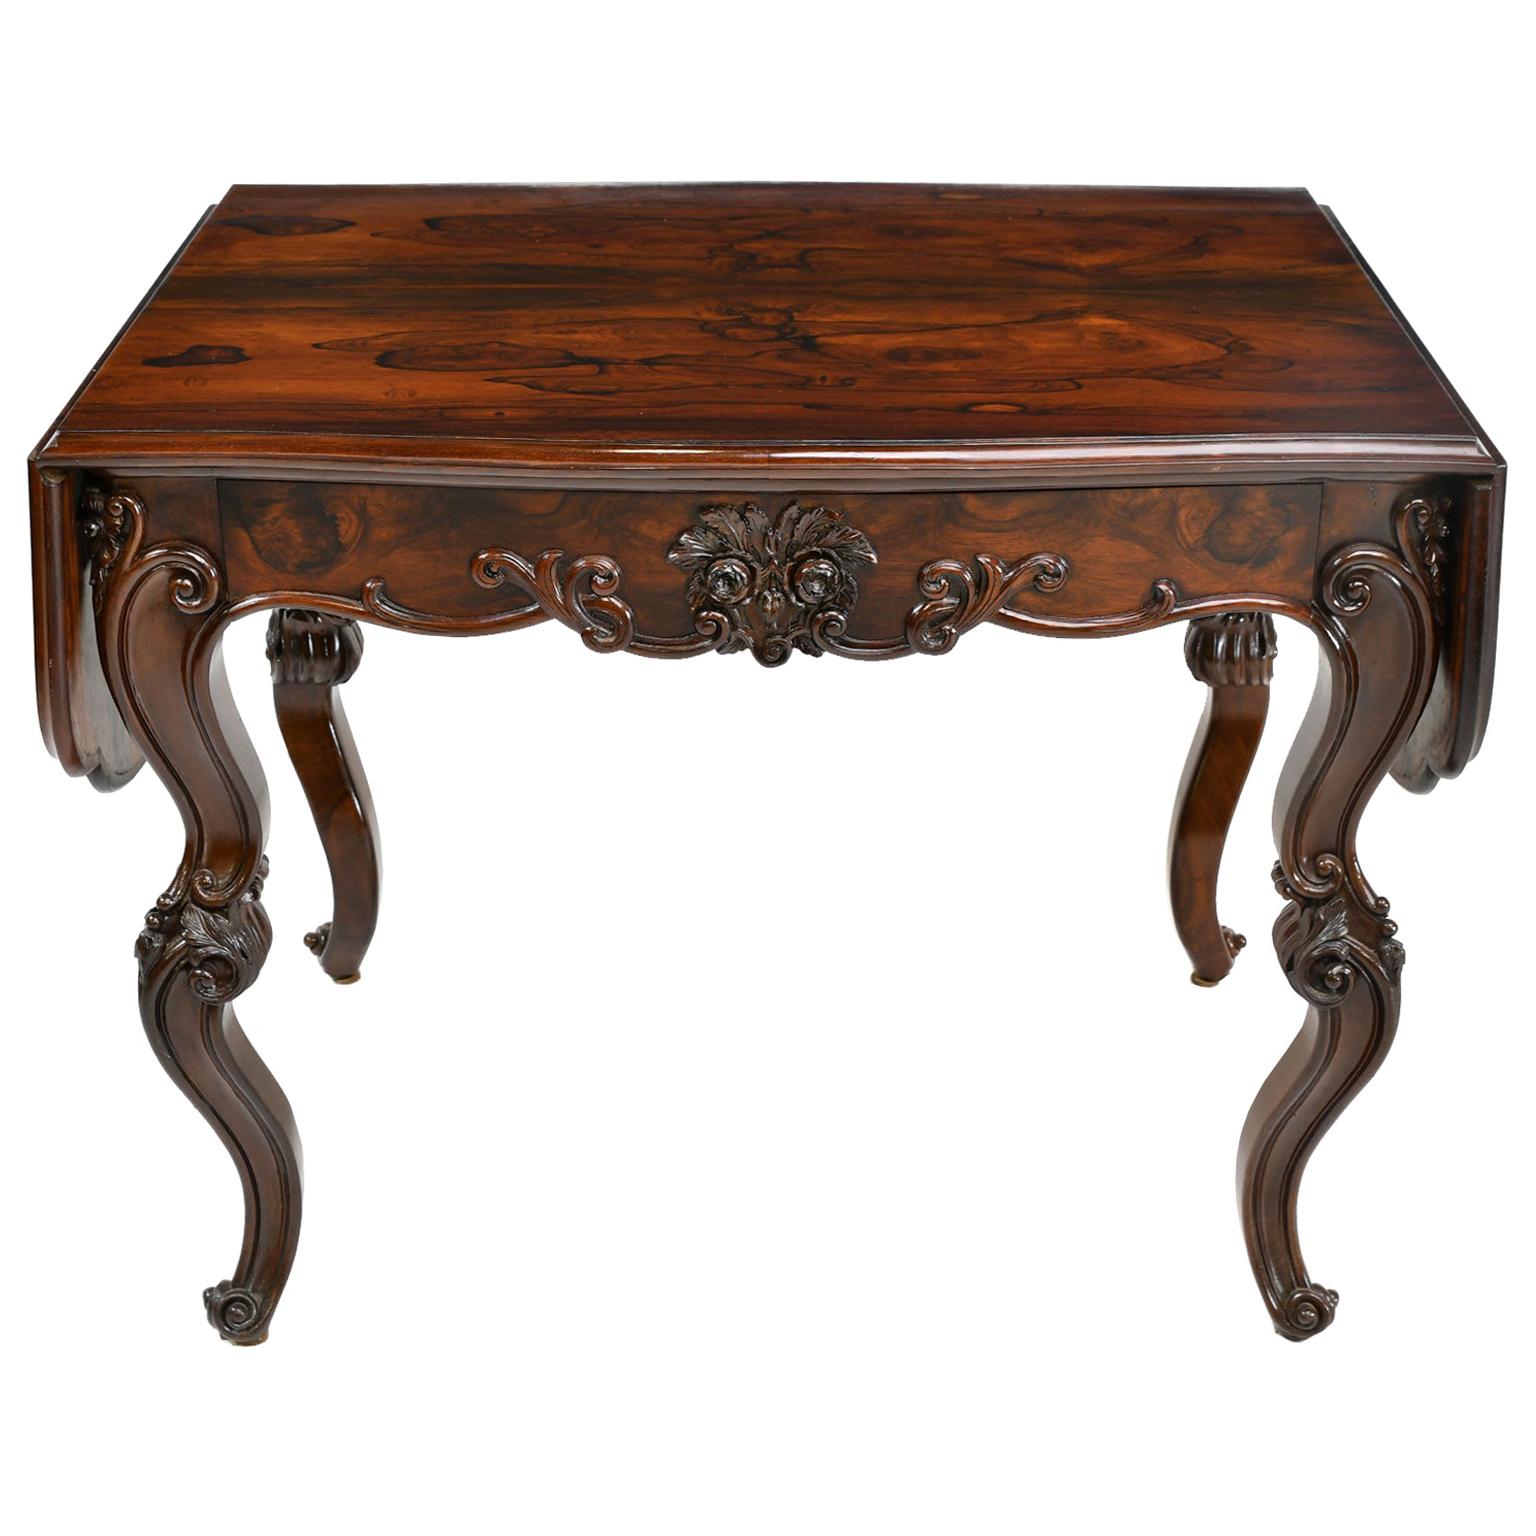 Rosewood American Rococo Revival Sofa Table or Writing Table NYC, circa 1840 For Sale